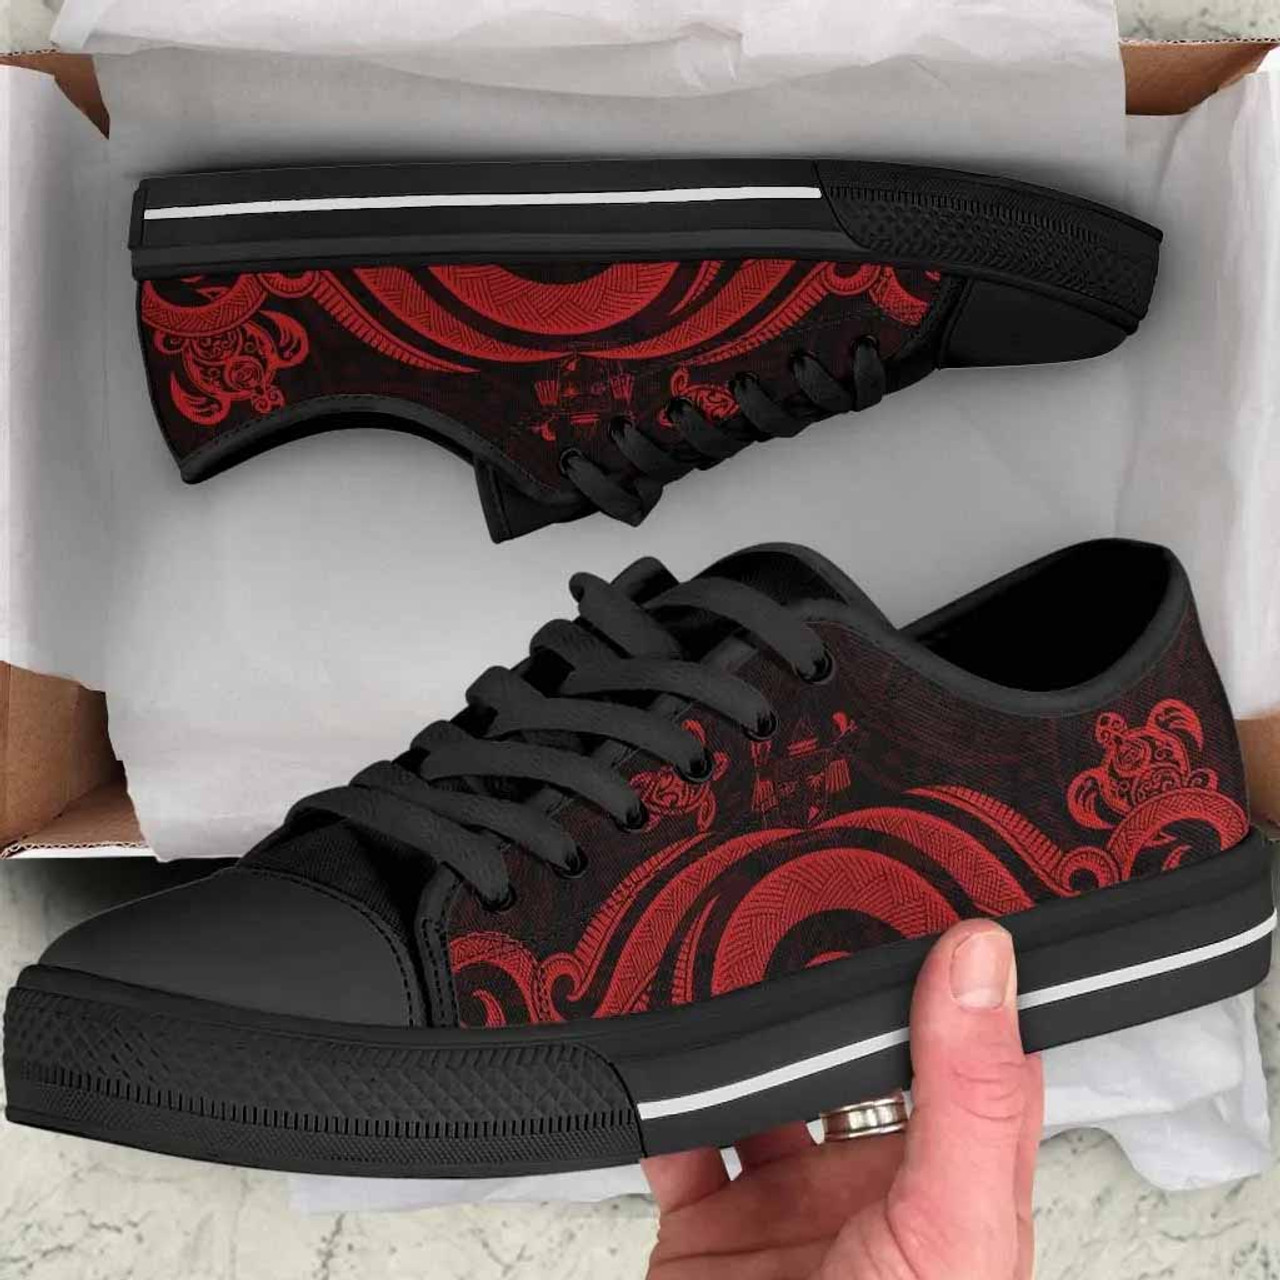 Fiji Low Top Canvas Shoes - Red Tentacle Turtle Crest 4